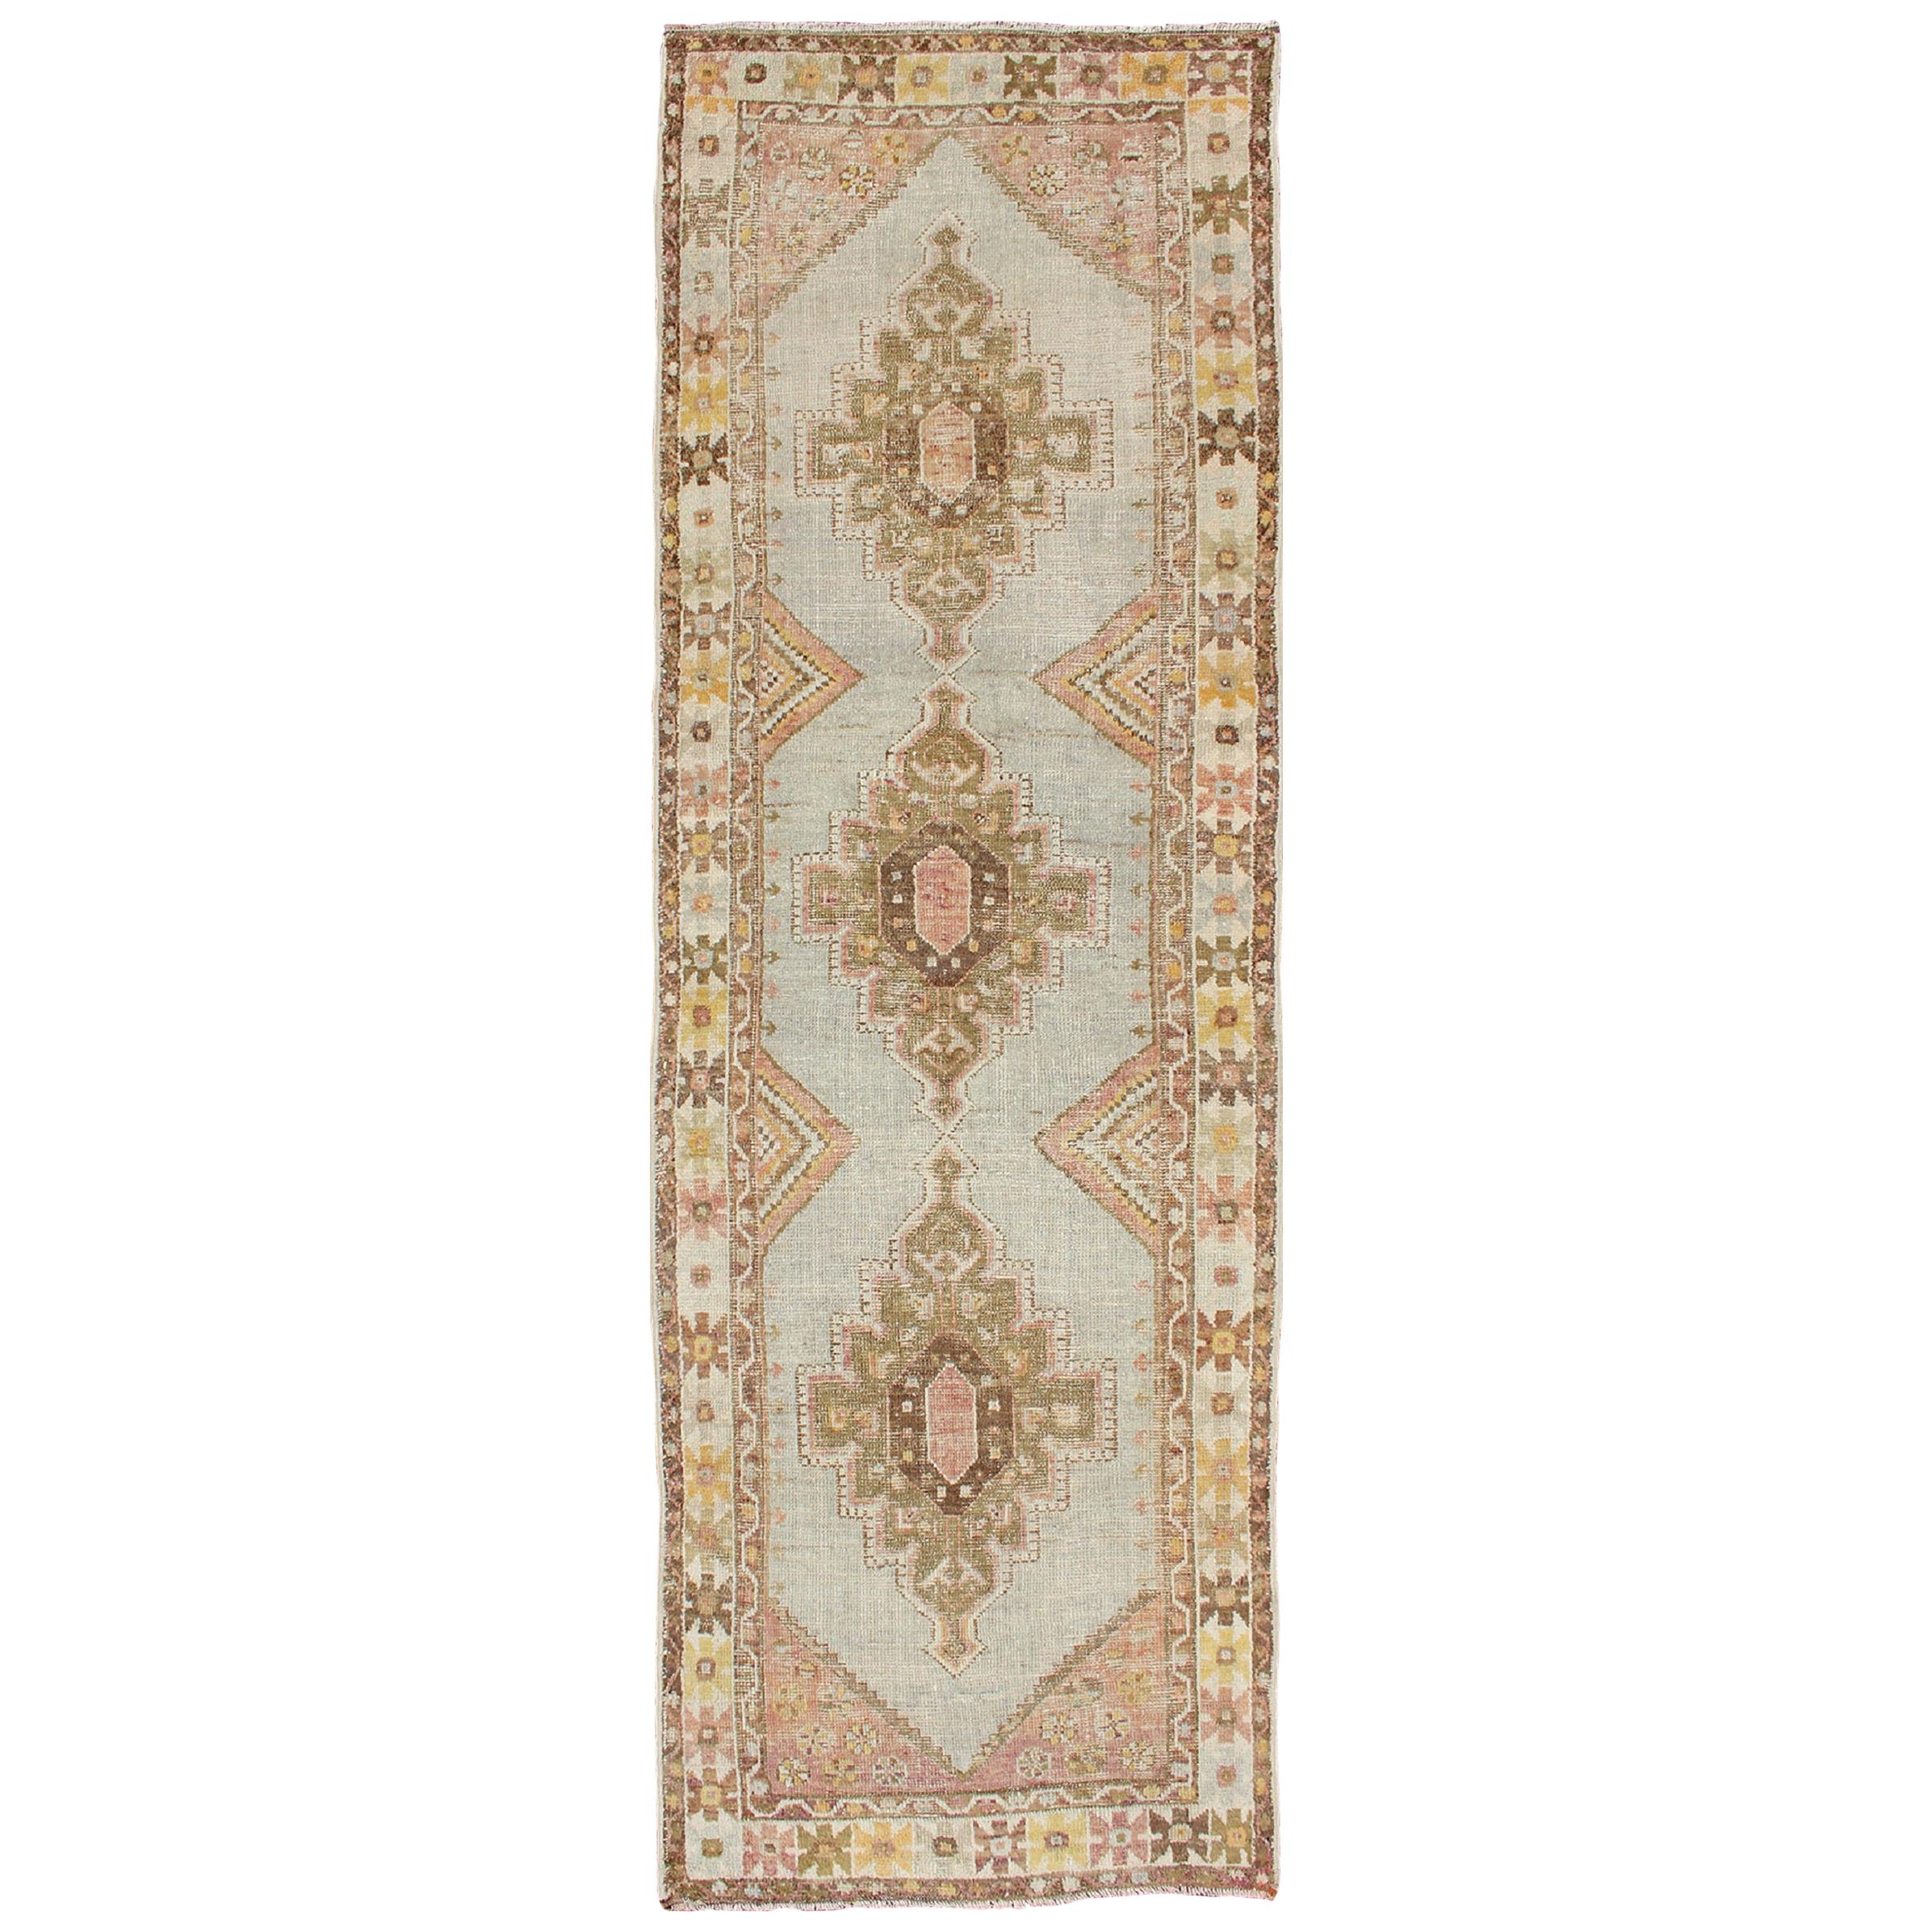 Antique Turkish Oushak Runner with Three-Layered Medallions